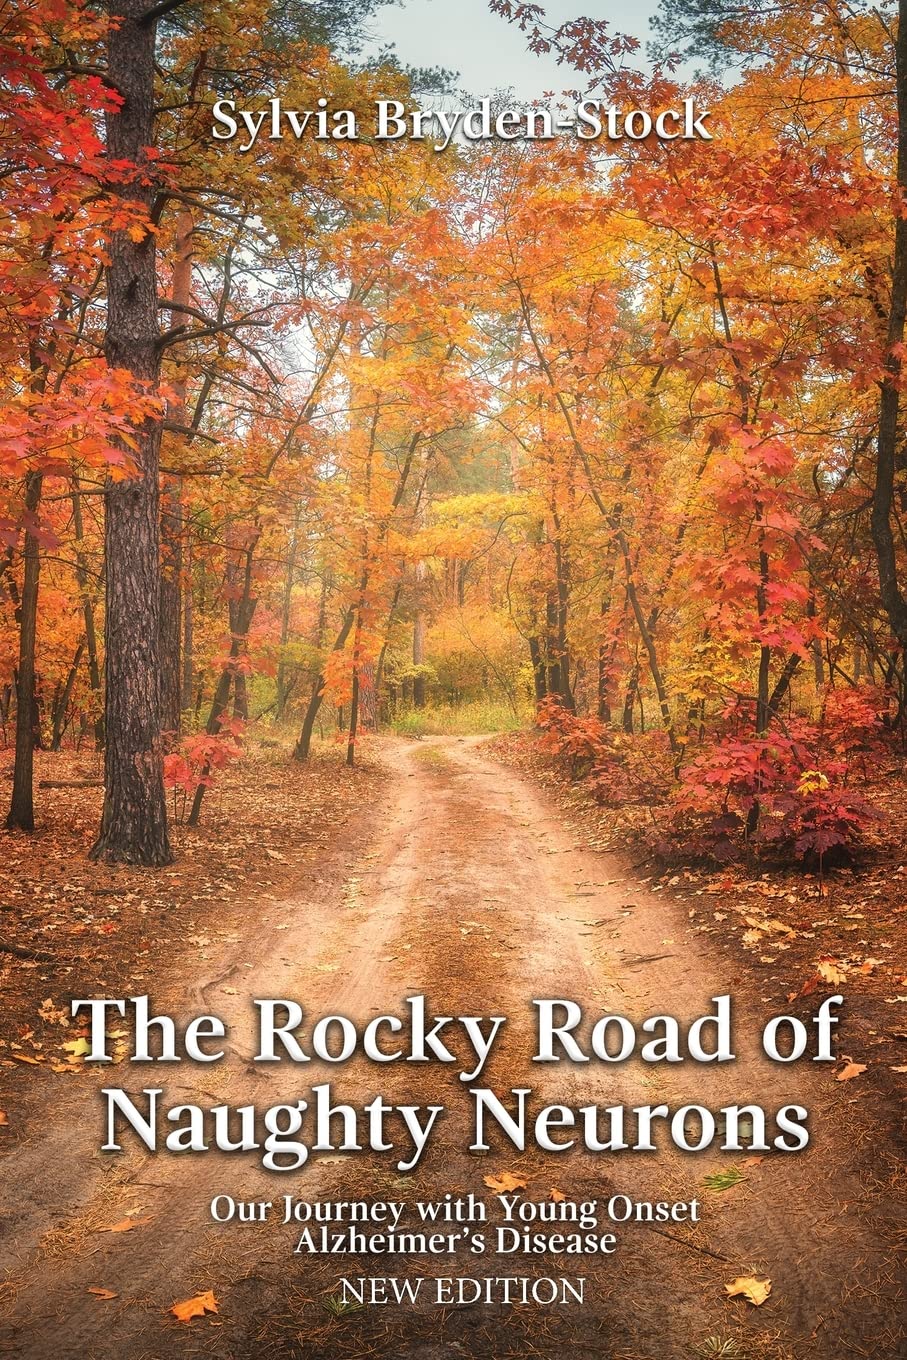 Author's Tranquility Press Publishes Sylvia Bryden-Stock’s The Rocky Road of Naughty Neurons